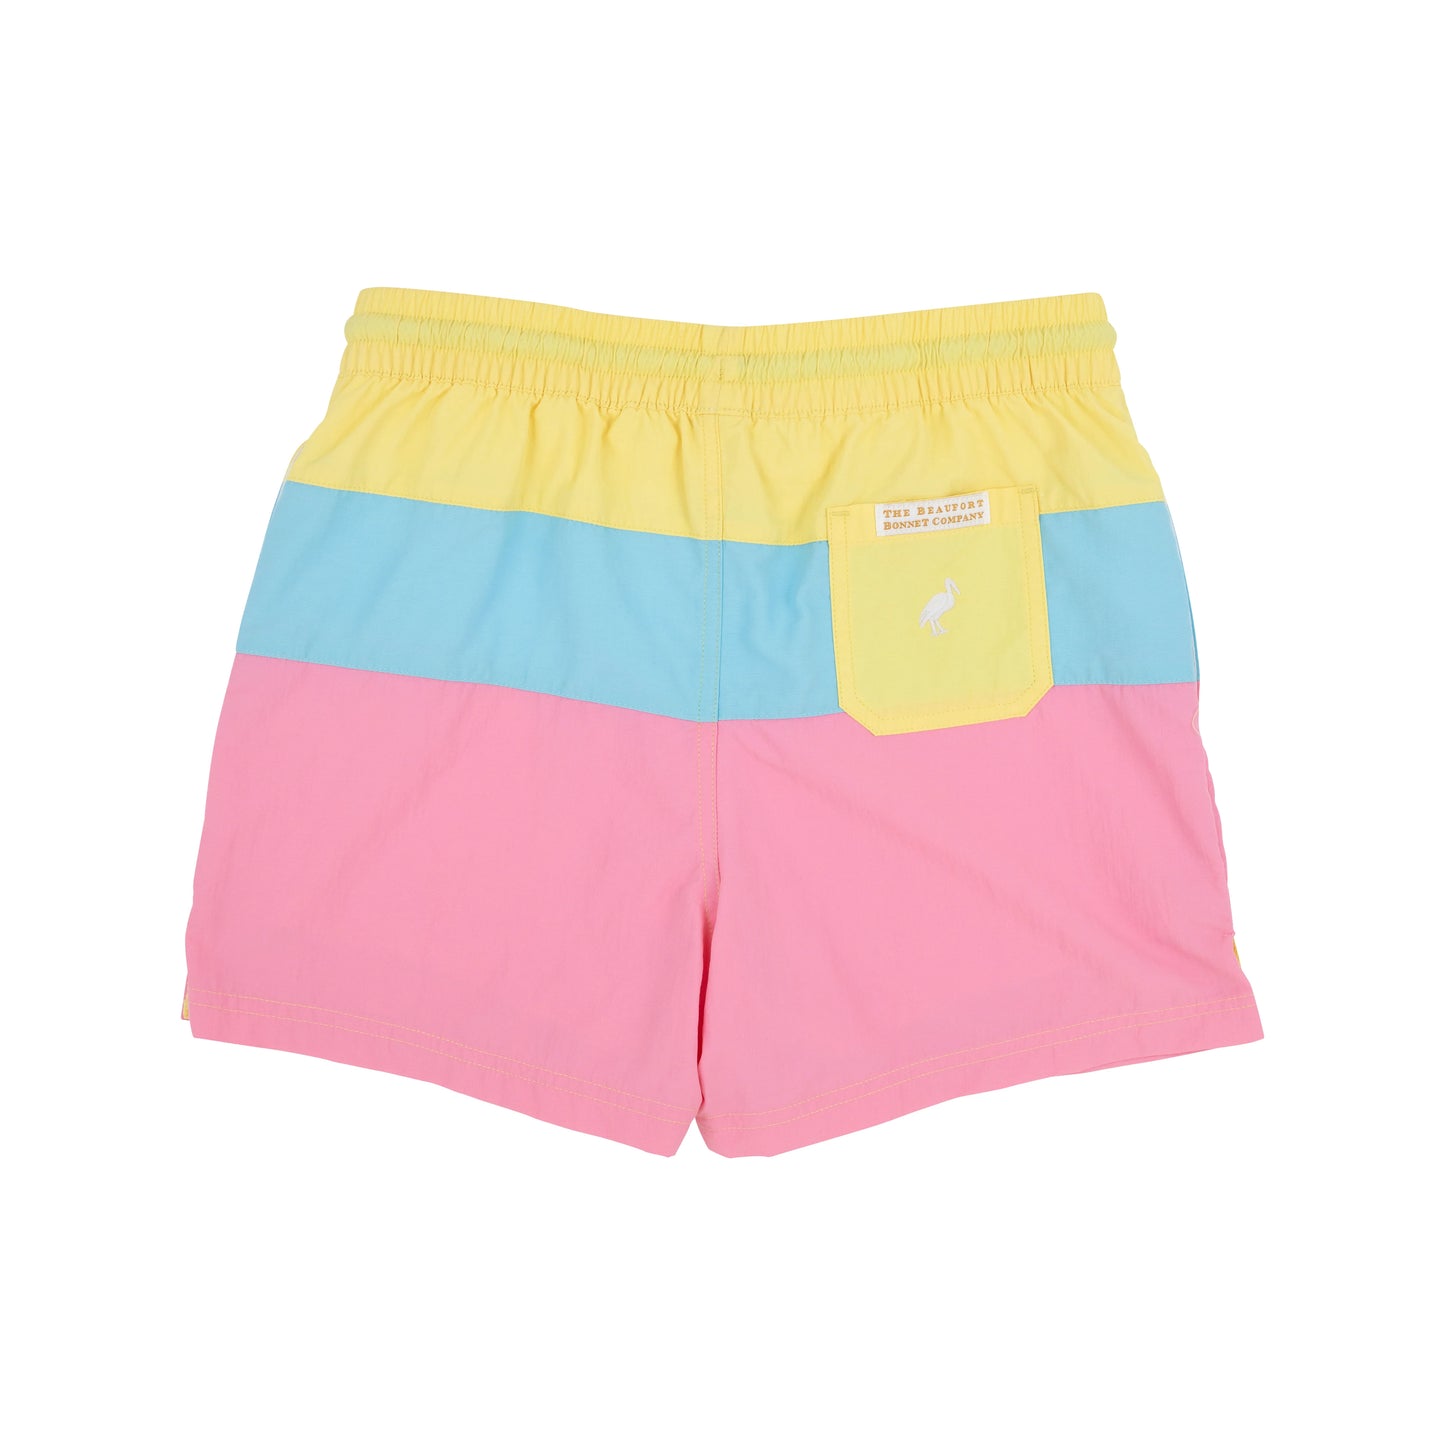 Country Club Colorblock Trunk